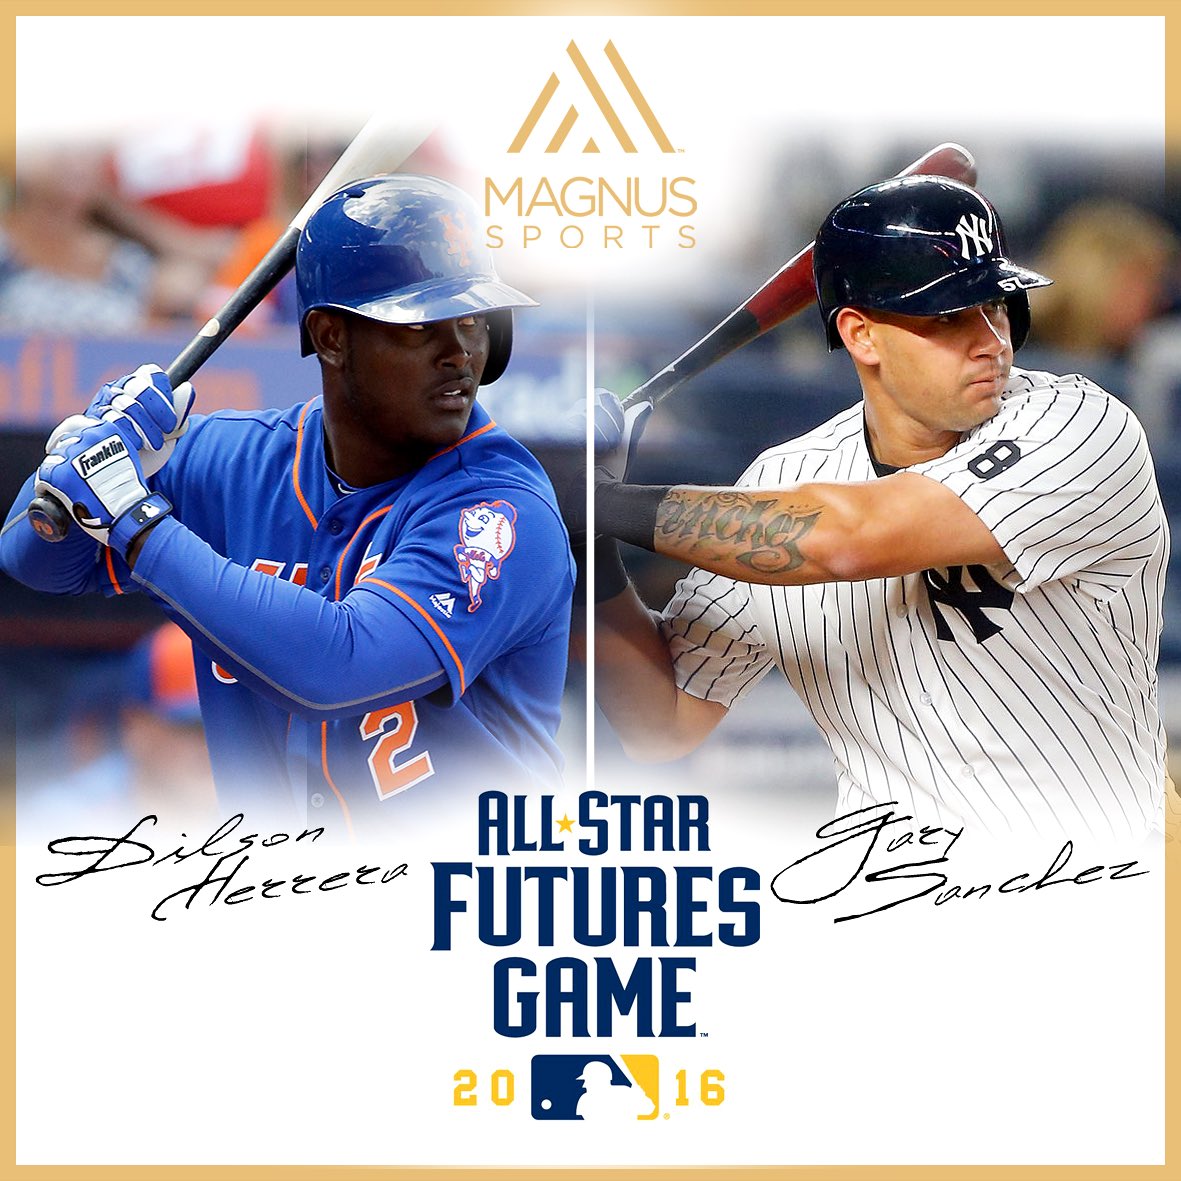 RT @magnusmedia: Congratulations to @Dilson_H and @ElGarySanchez, who will represent #Magnus at today's @MLB All Star Futures Game! https:/…